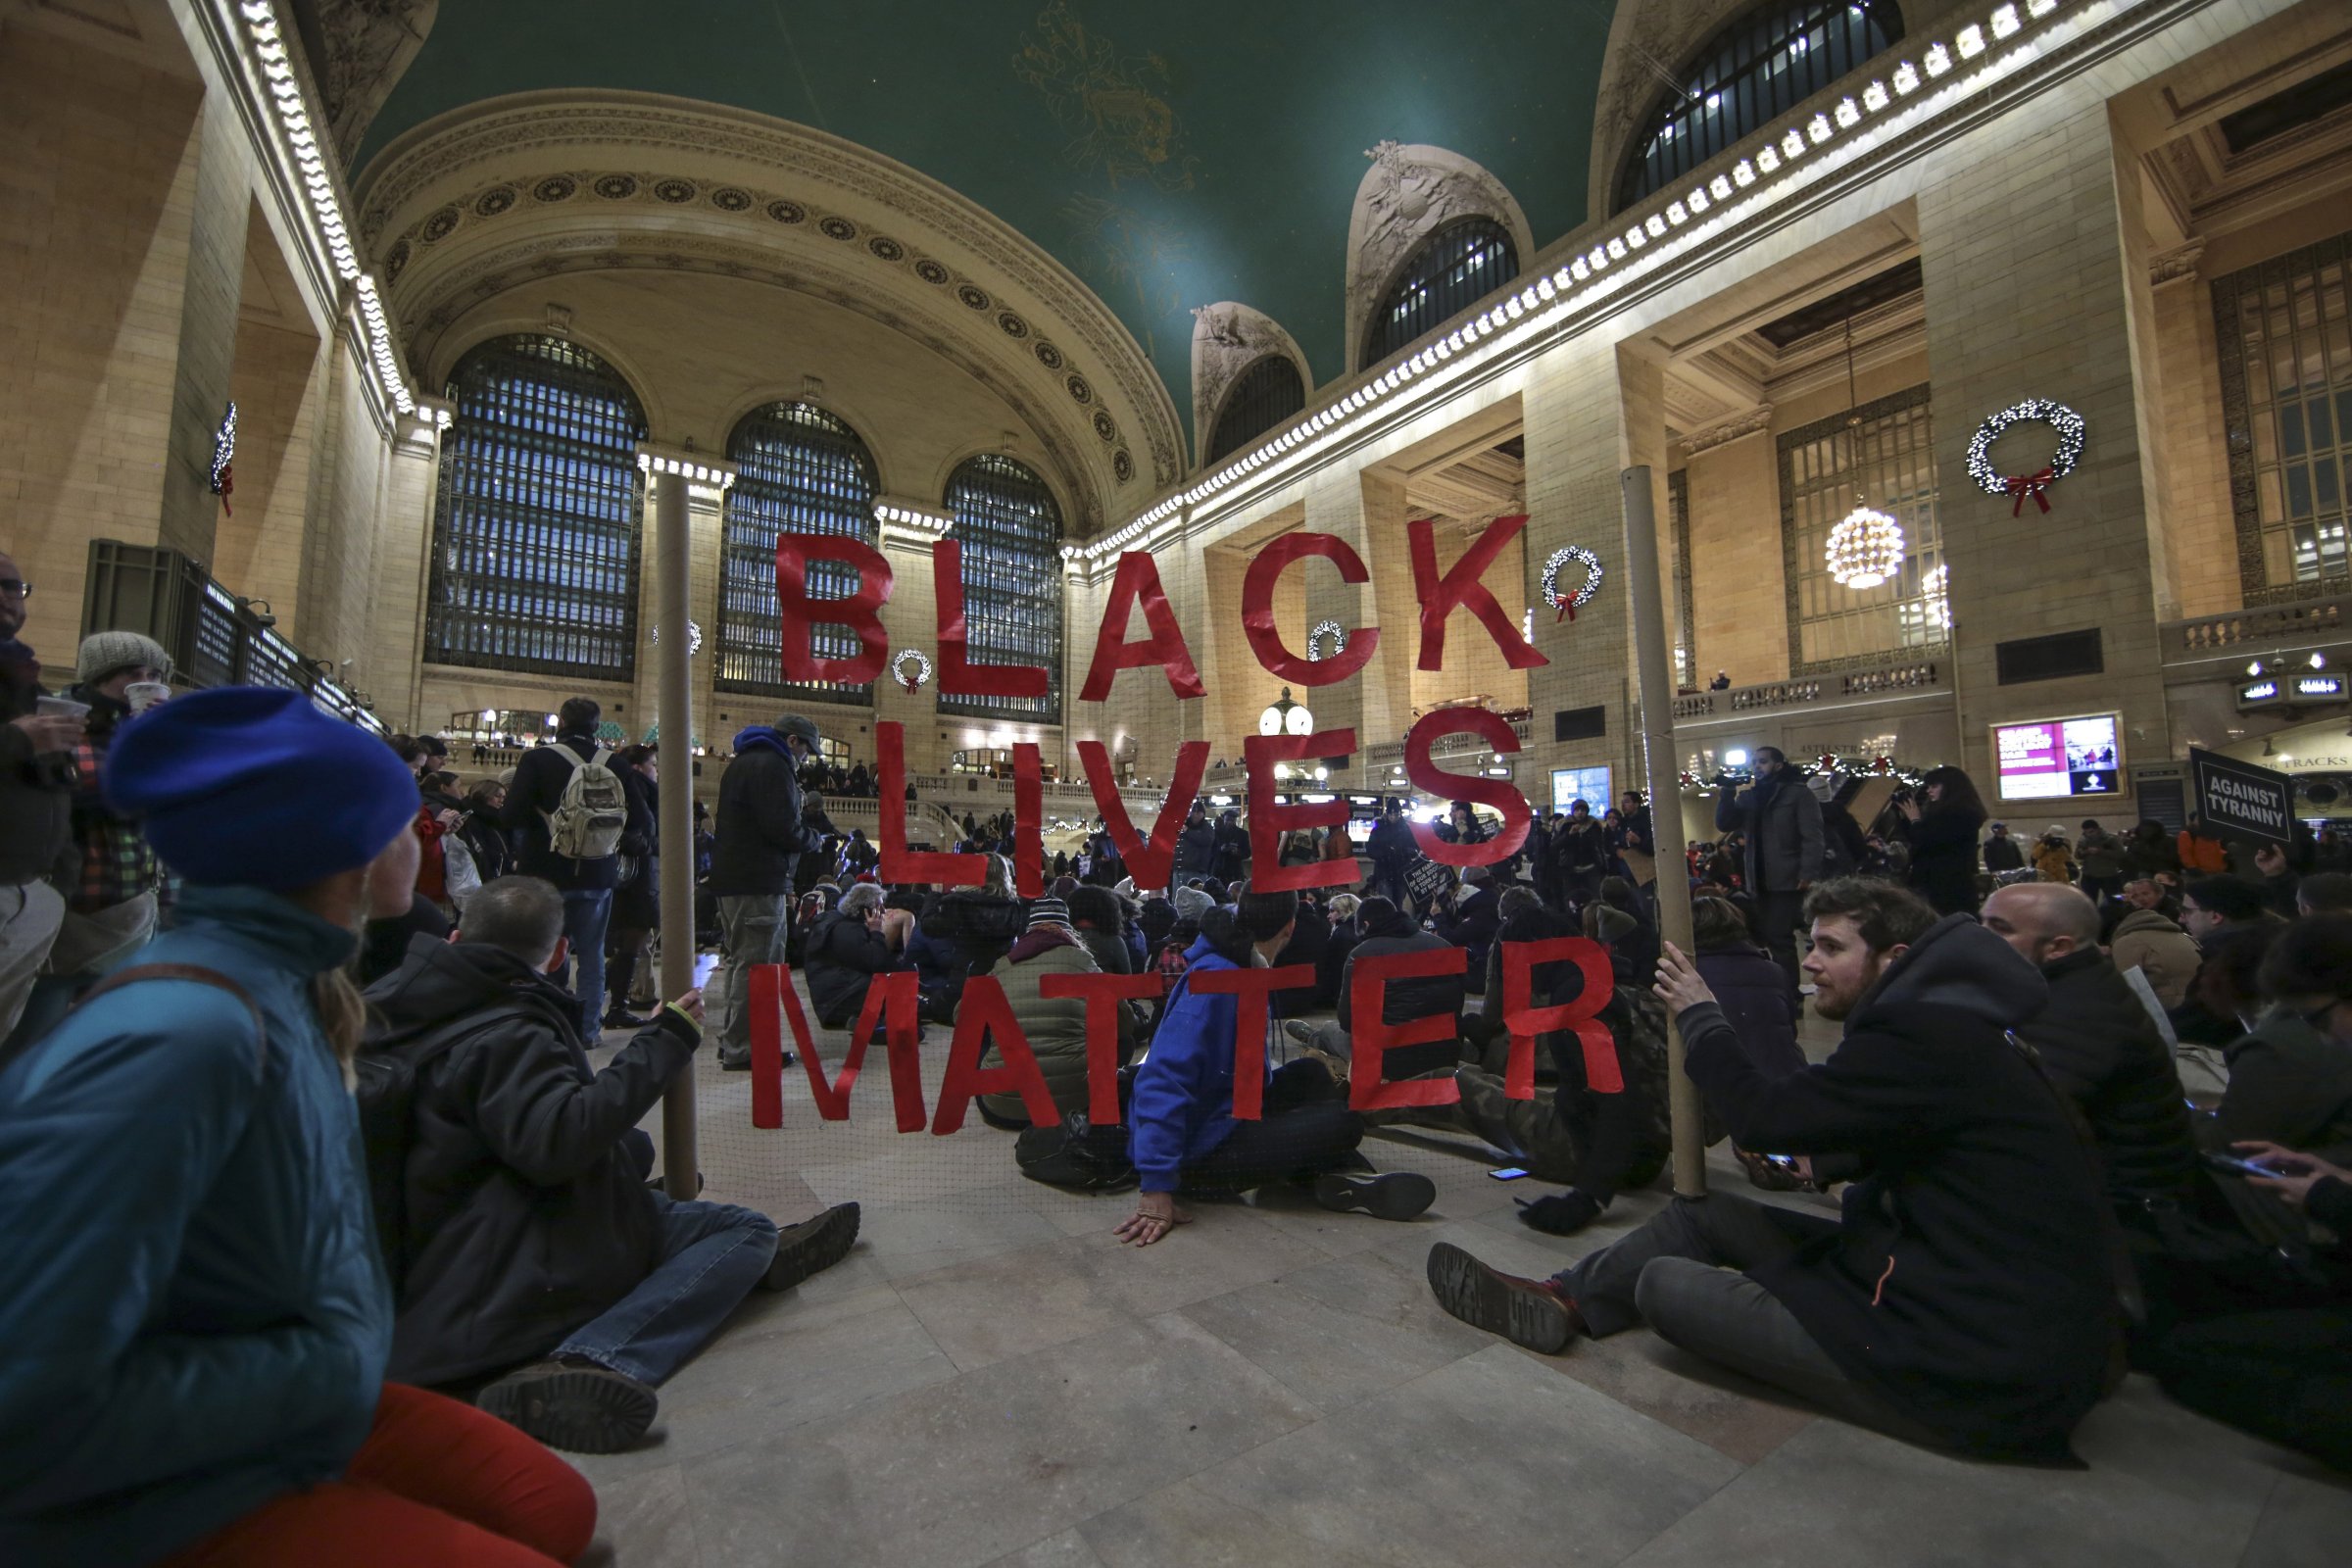 NEW YORK, NY - DECEMBER 7: Protesters hold a banner during a protest at Grand Central Terminal after a grand jury decided not to indict a police officer involved in the death of  Eric Garner in July on December 7, 2014 in New York, N.Y. Protests are being staged nationwide after grand juries investigating the deaths of Michael Brown in Ferguson, Missouri and Eric Garner in New York failed to indict the police officers involved in both incidents. (Photo by Bilgin S. Sasmaz/Anadolu Agency/Getty Images)